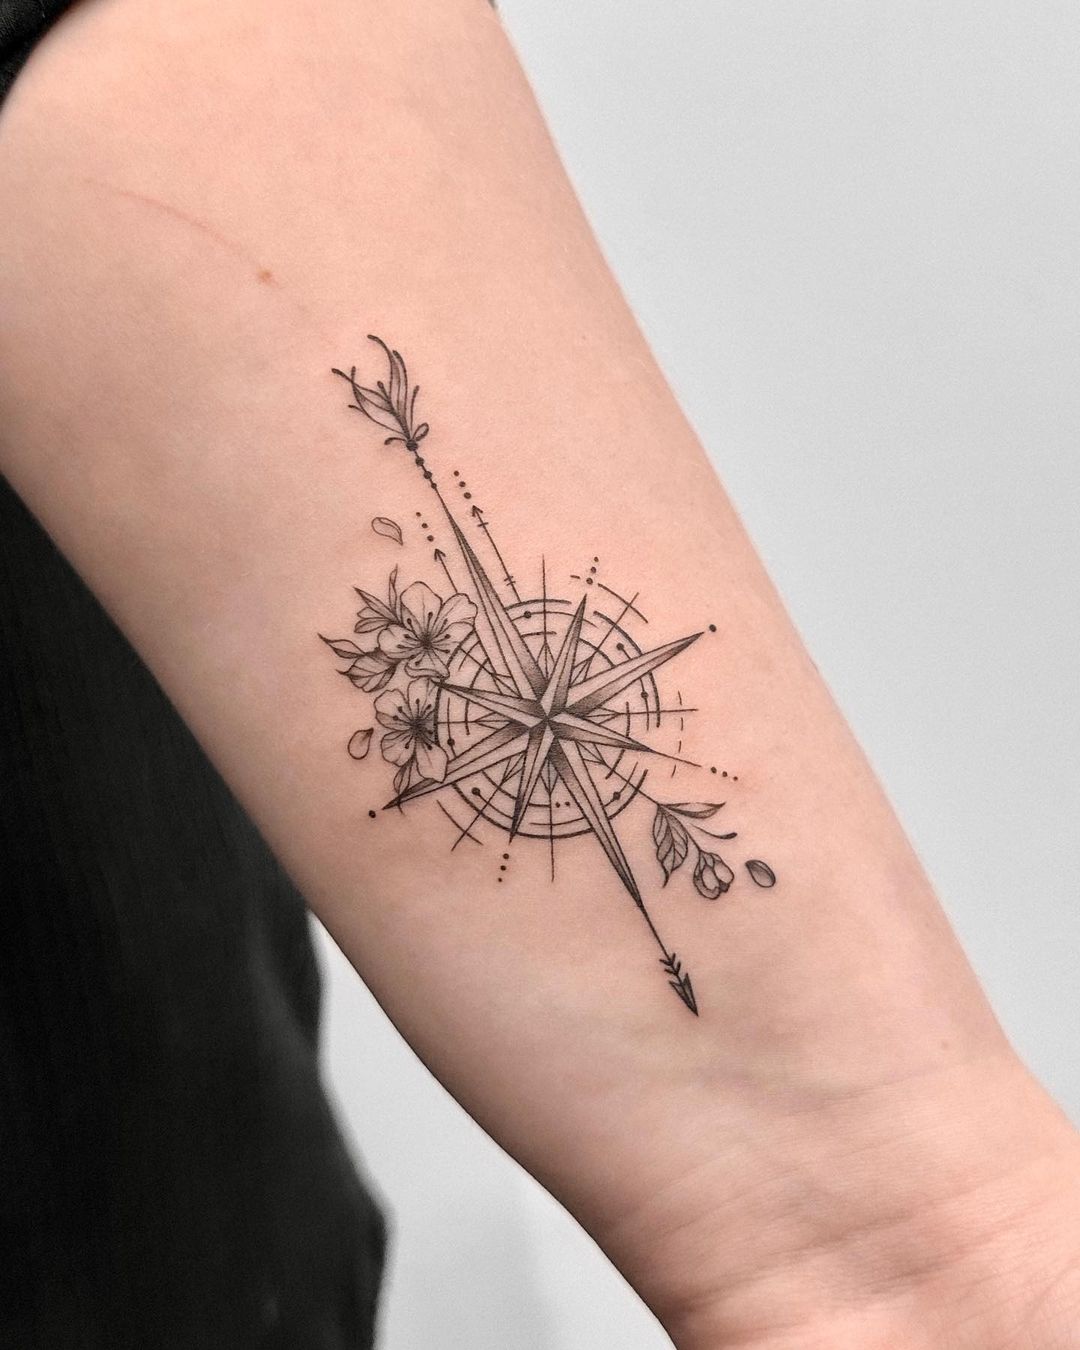 A Journey Captured On The Forearm